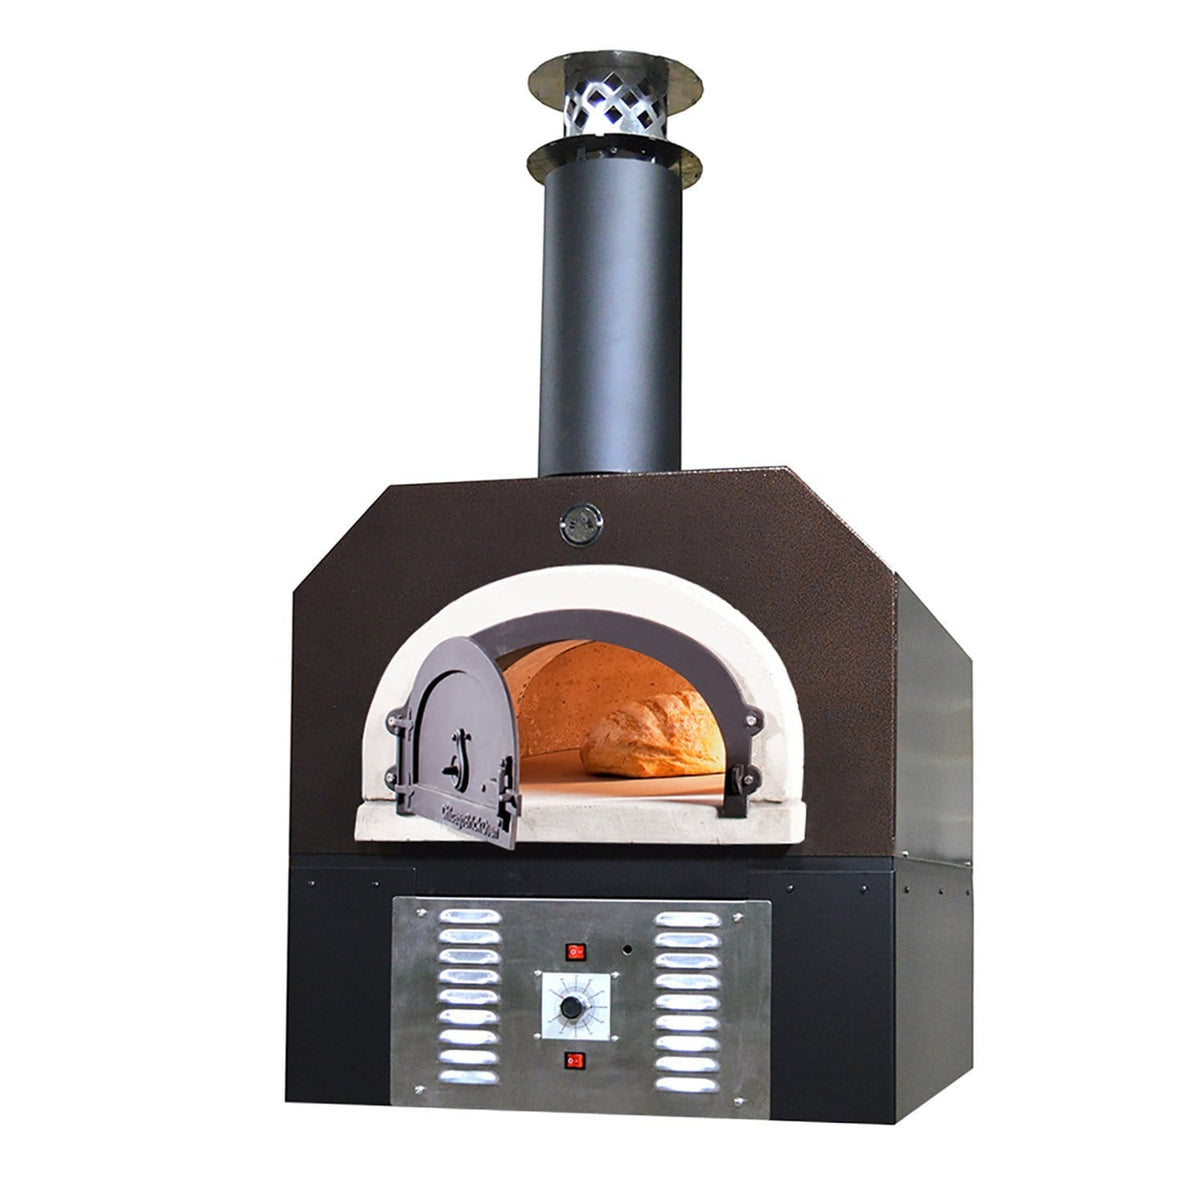 Full Display of Chicago Brick Oven 750 Hybrid Model Gas and Wood Pizza oven